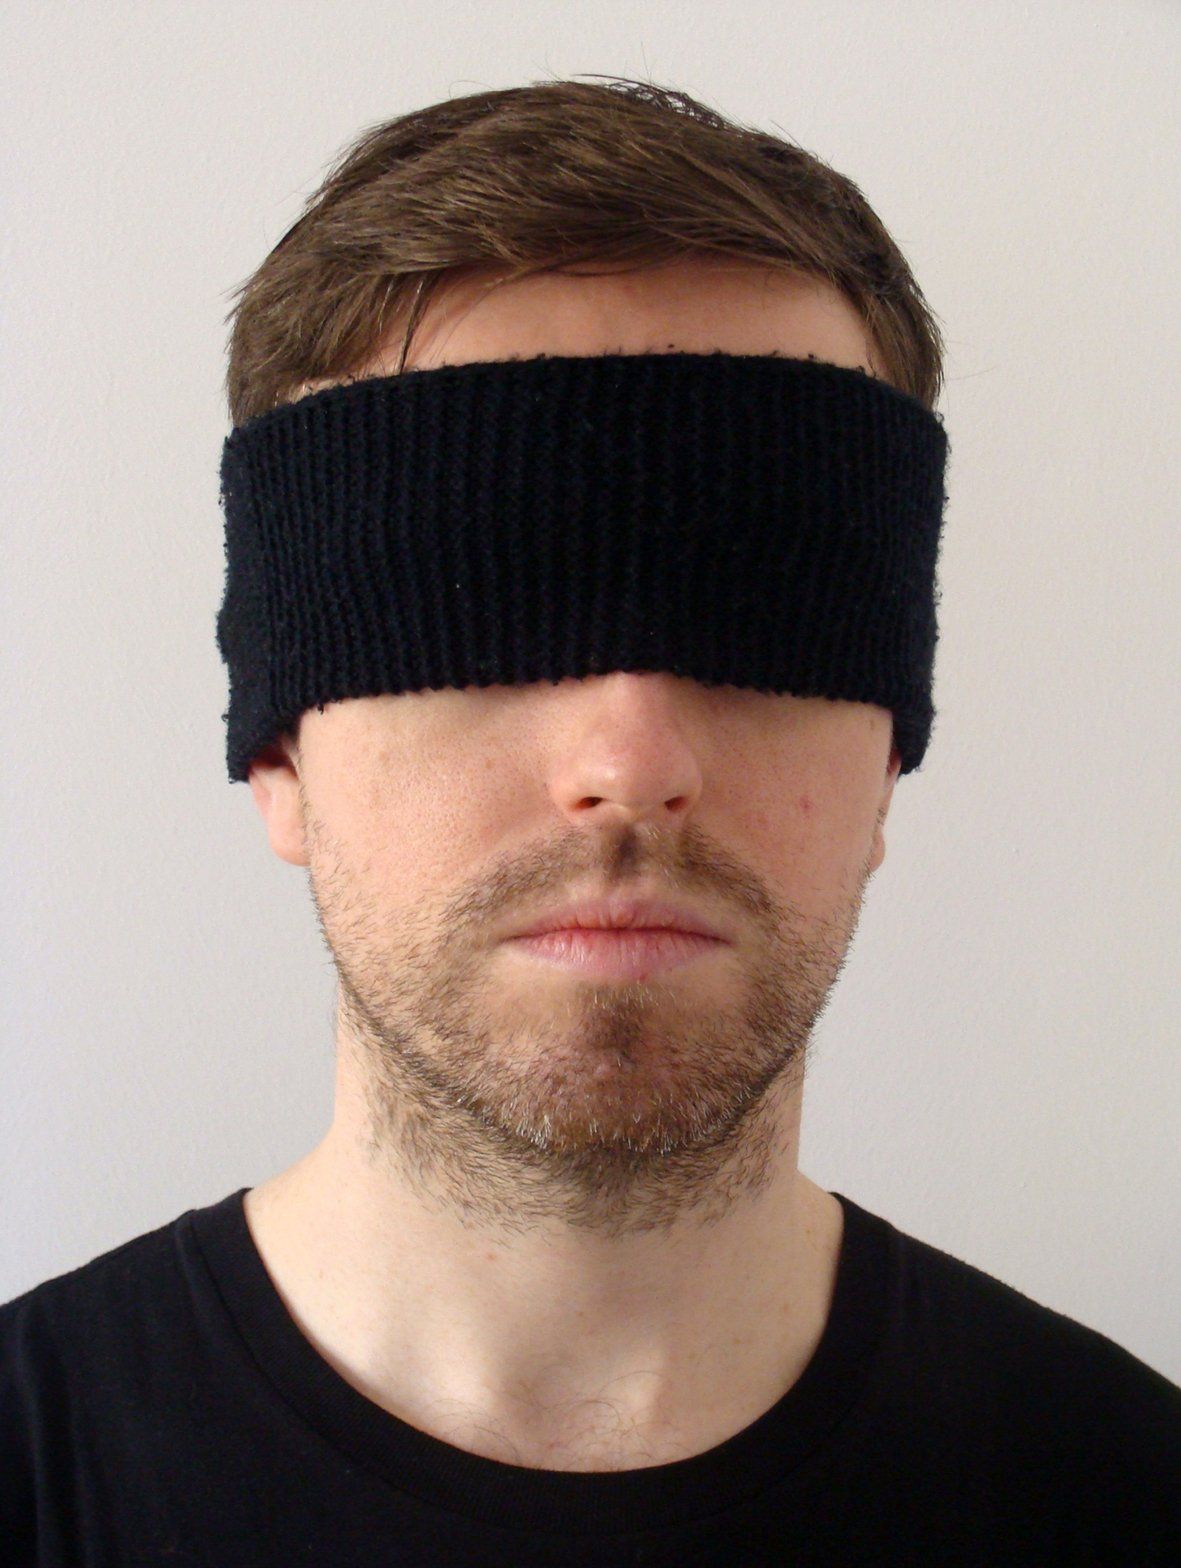 a man wearing a black headband covering his eyes